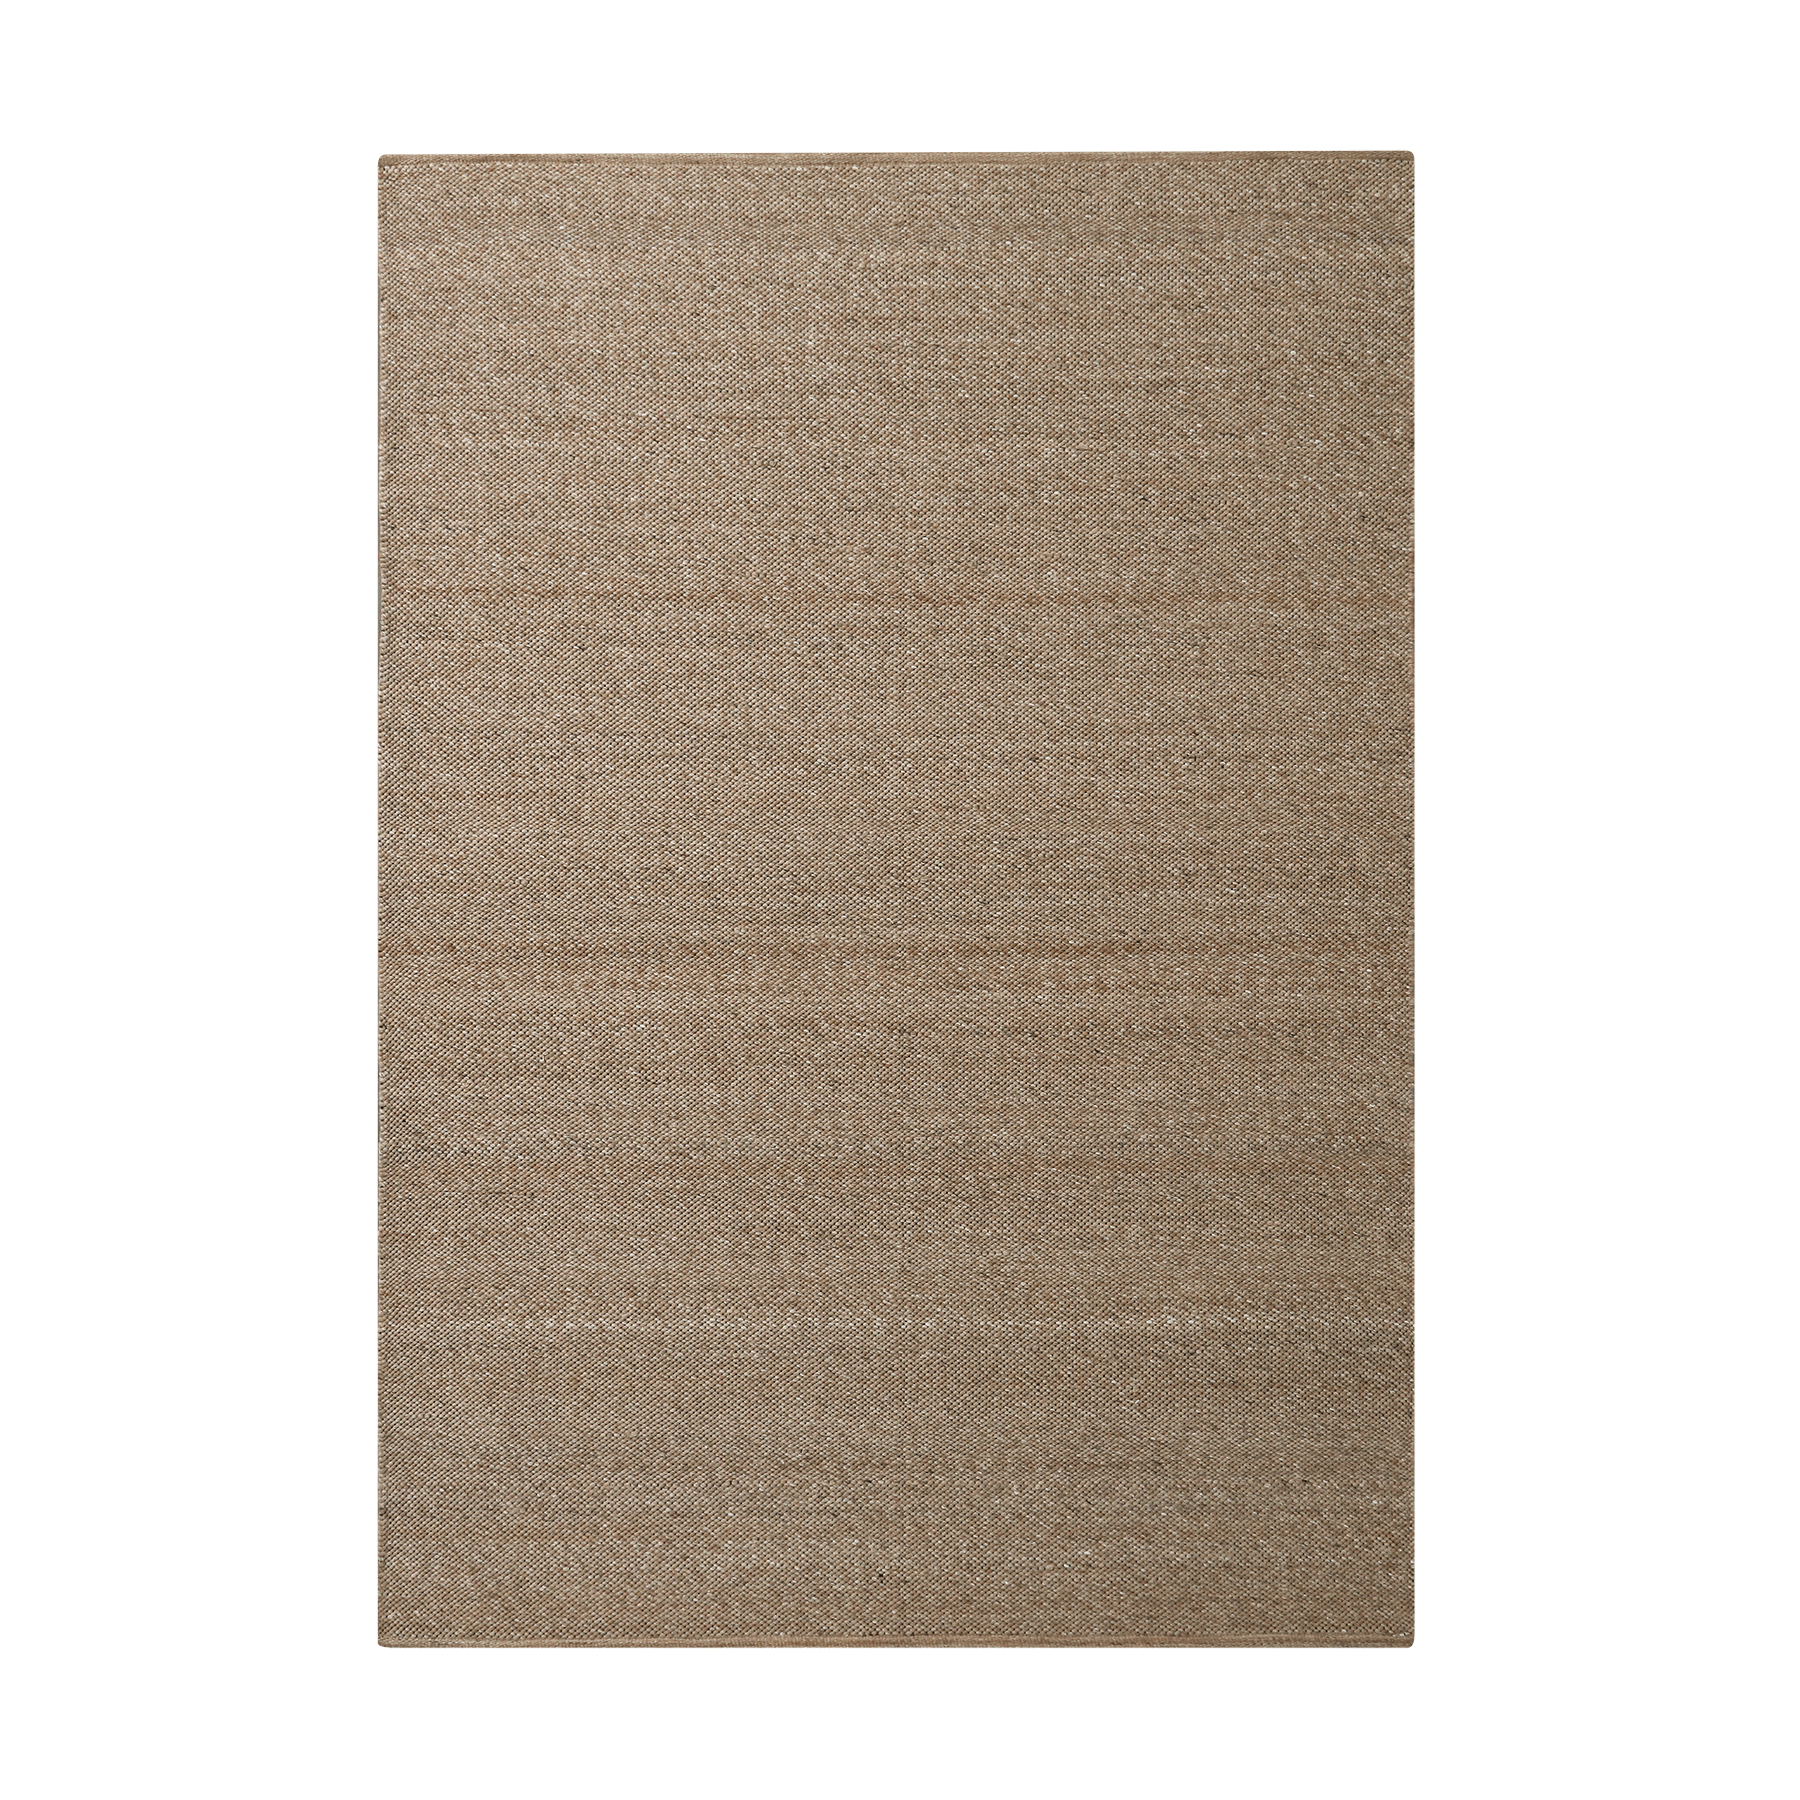 H2 rug in Almond